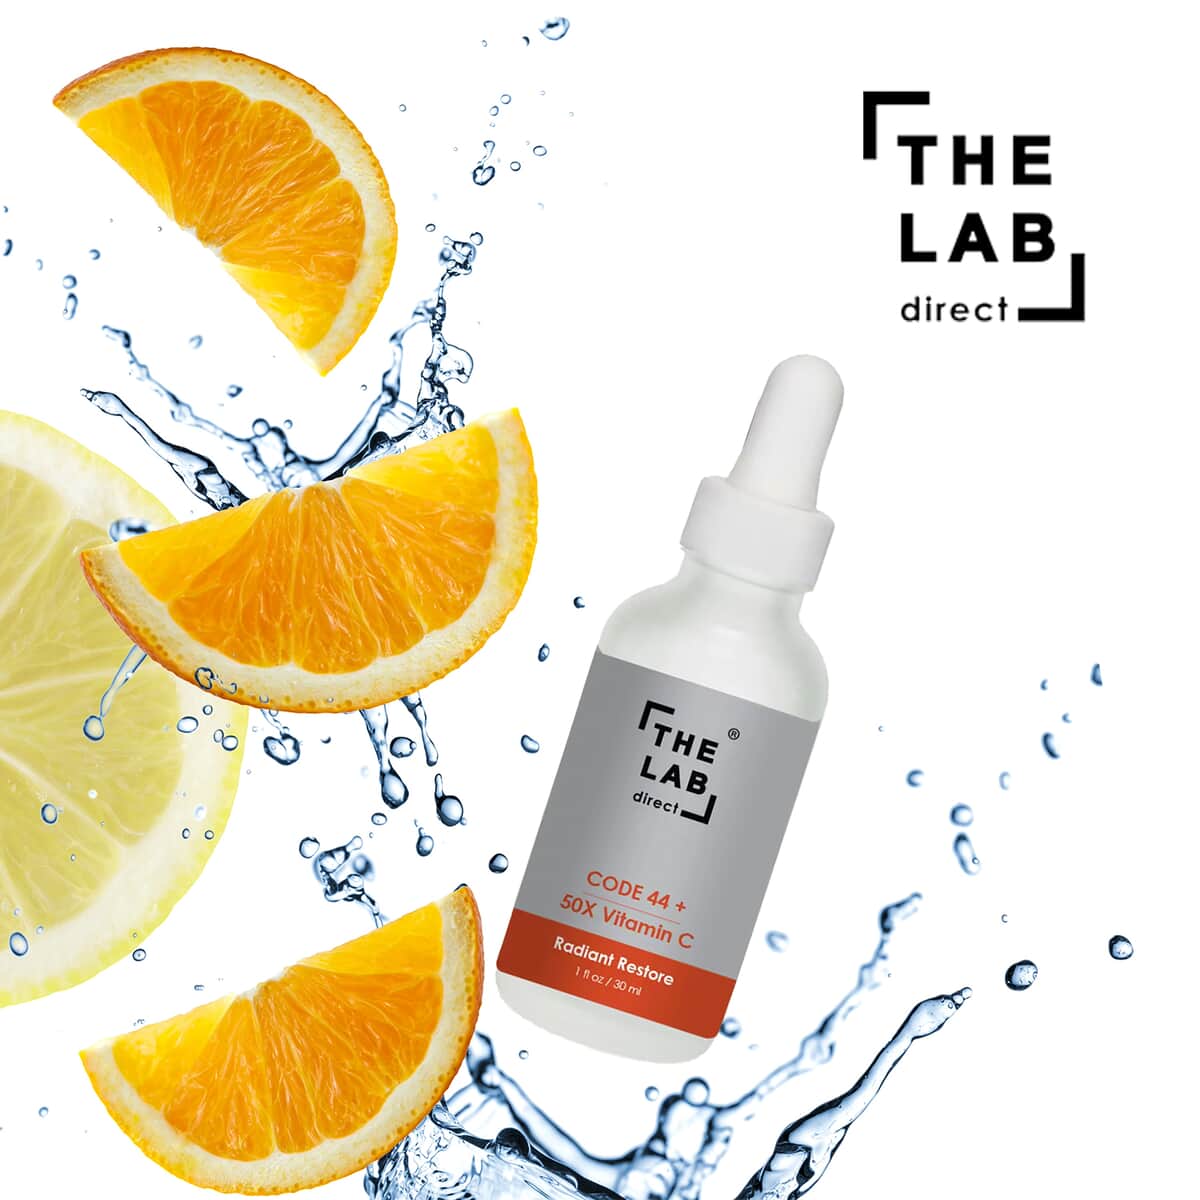 The Lab Direct Code 44+ 50x Vitamin C Radiant Restore Serum For All Skin Types, Cruelty And Paraben Free Face Serum For Firm Skin and Collagen Production 1 oz image number 1